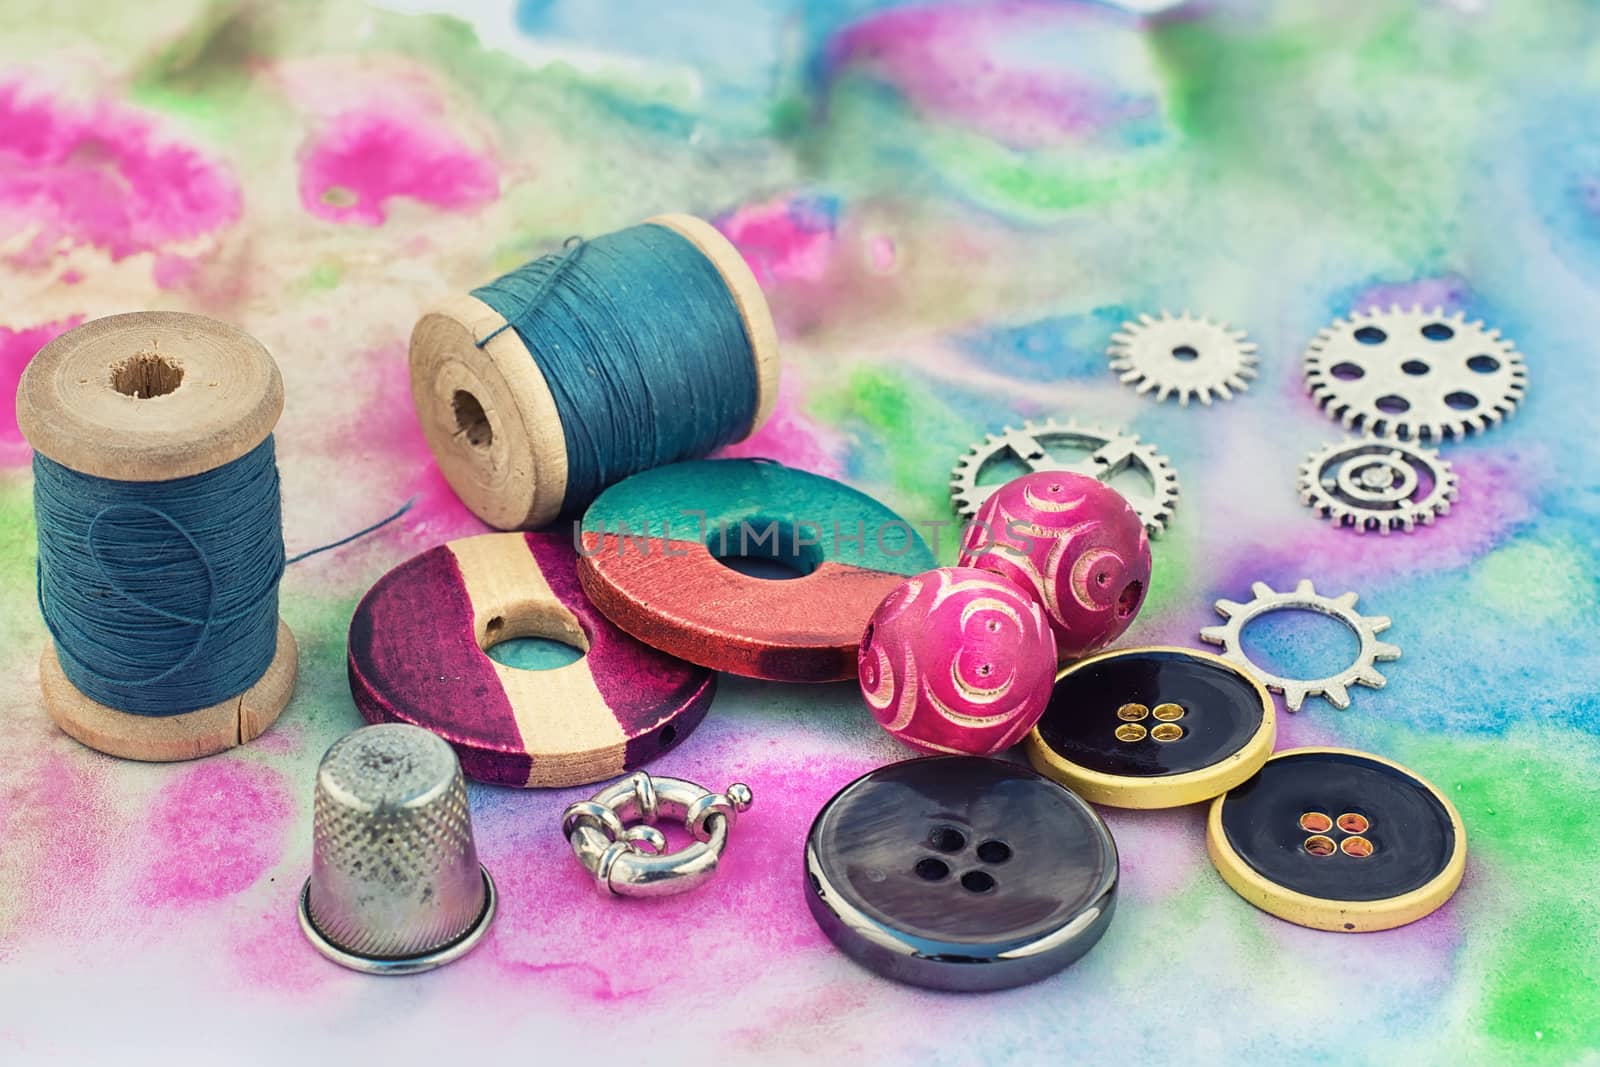 spool of thread with beads and accessories for needlework on bright background